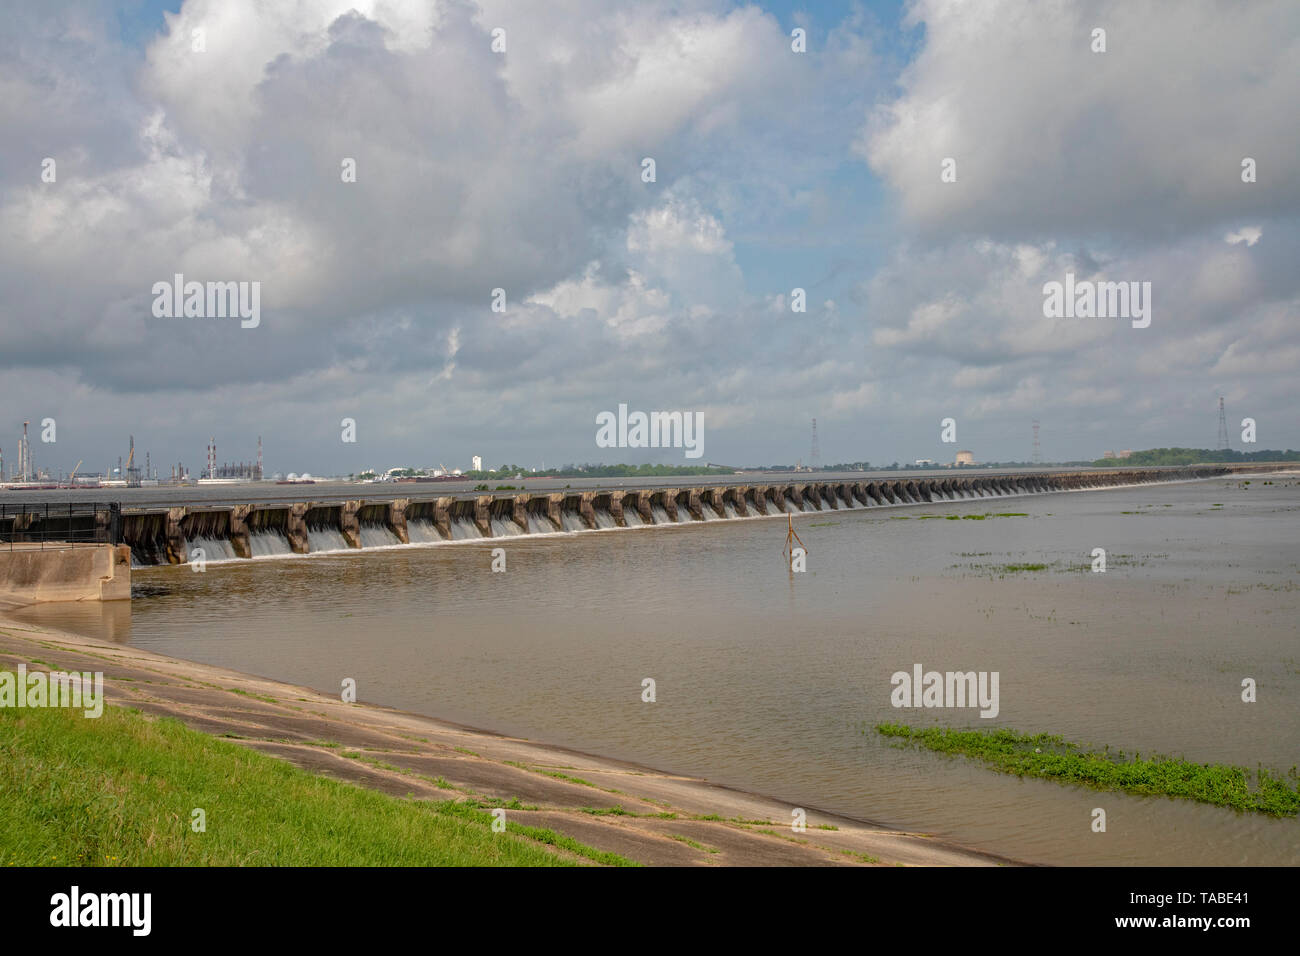 Norco, Louisiana - The U.S. Army Corps of Engineers opened the Bonnet Carré Spillway to protect New Orleans from Mississippi River flooding. The spill Stock Photo